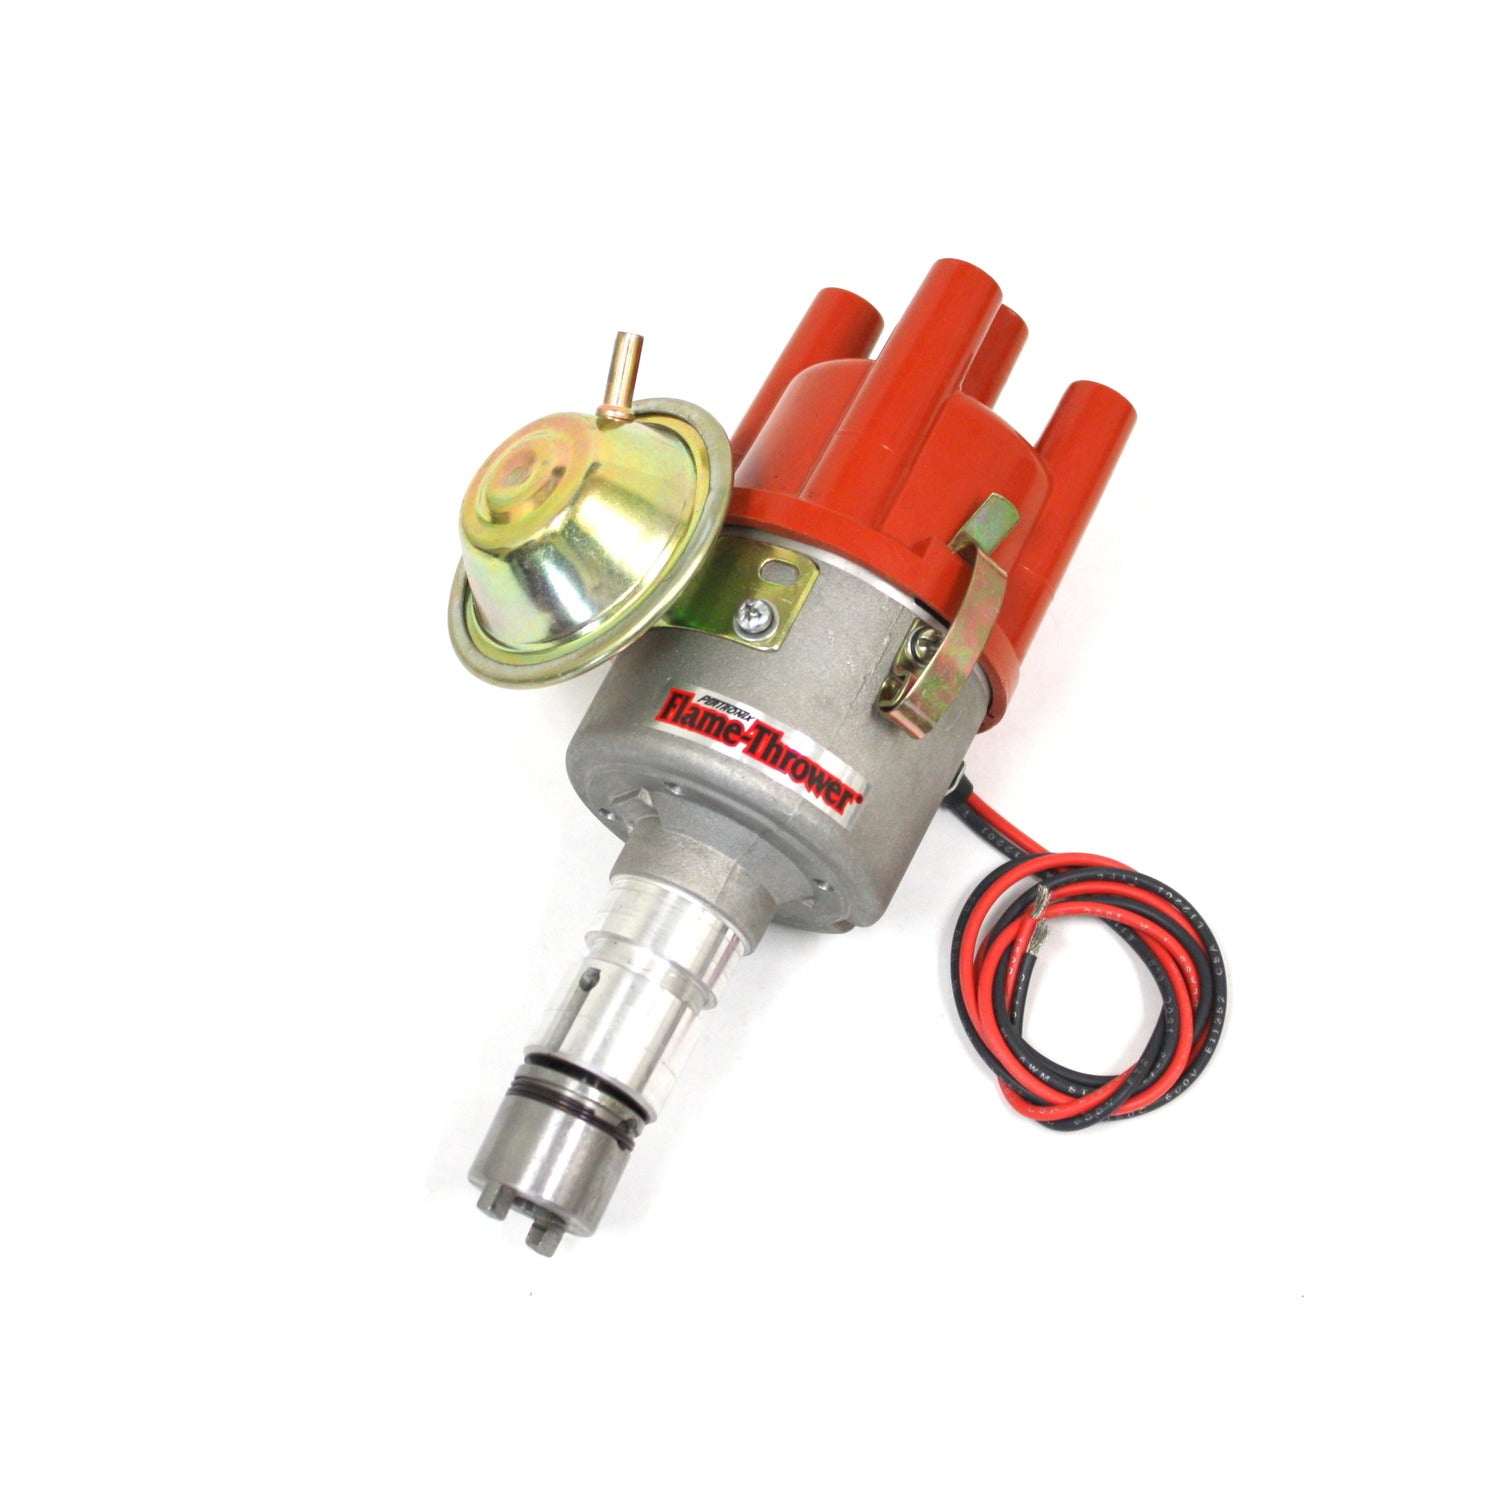 PerTronix D185504 Flame-Thrower Electronic Distributor Cast Alfa Romeo Plug and Play with Ignitor Vacuum Advance